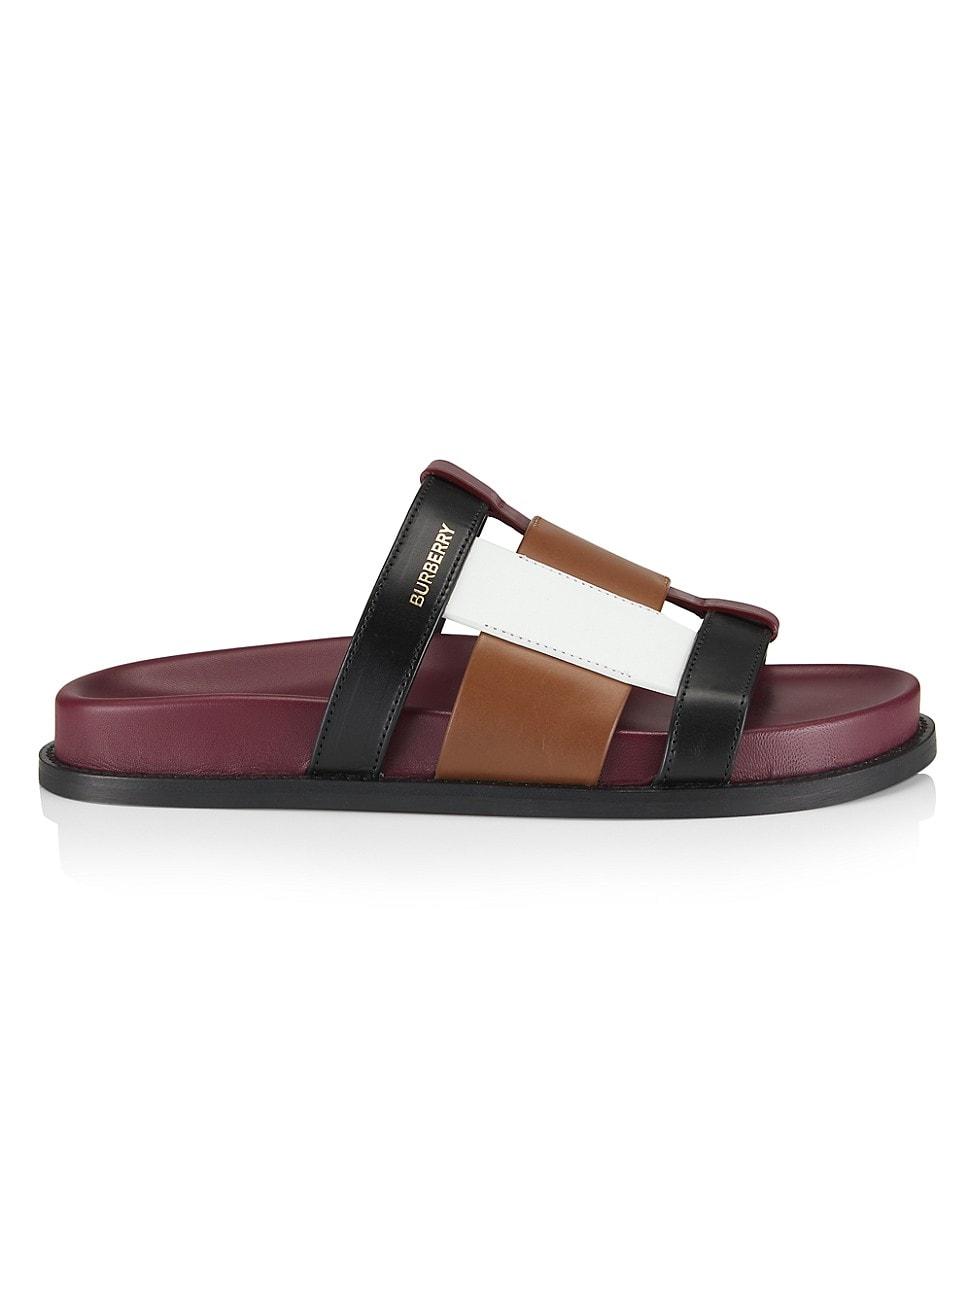 Burberry Thelma Colorblocked Strappy Slide Sandals in Brown | Lyst